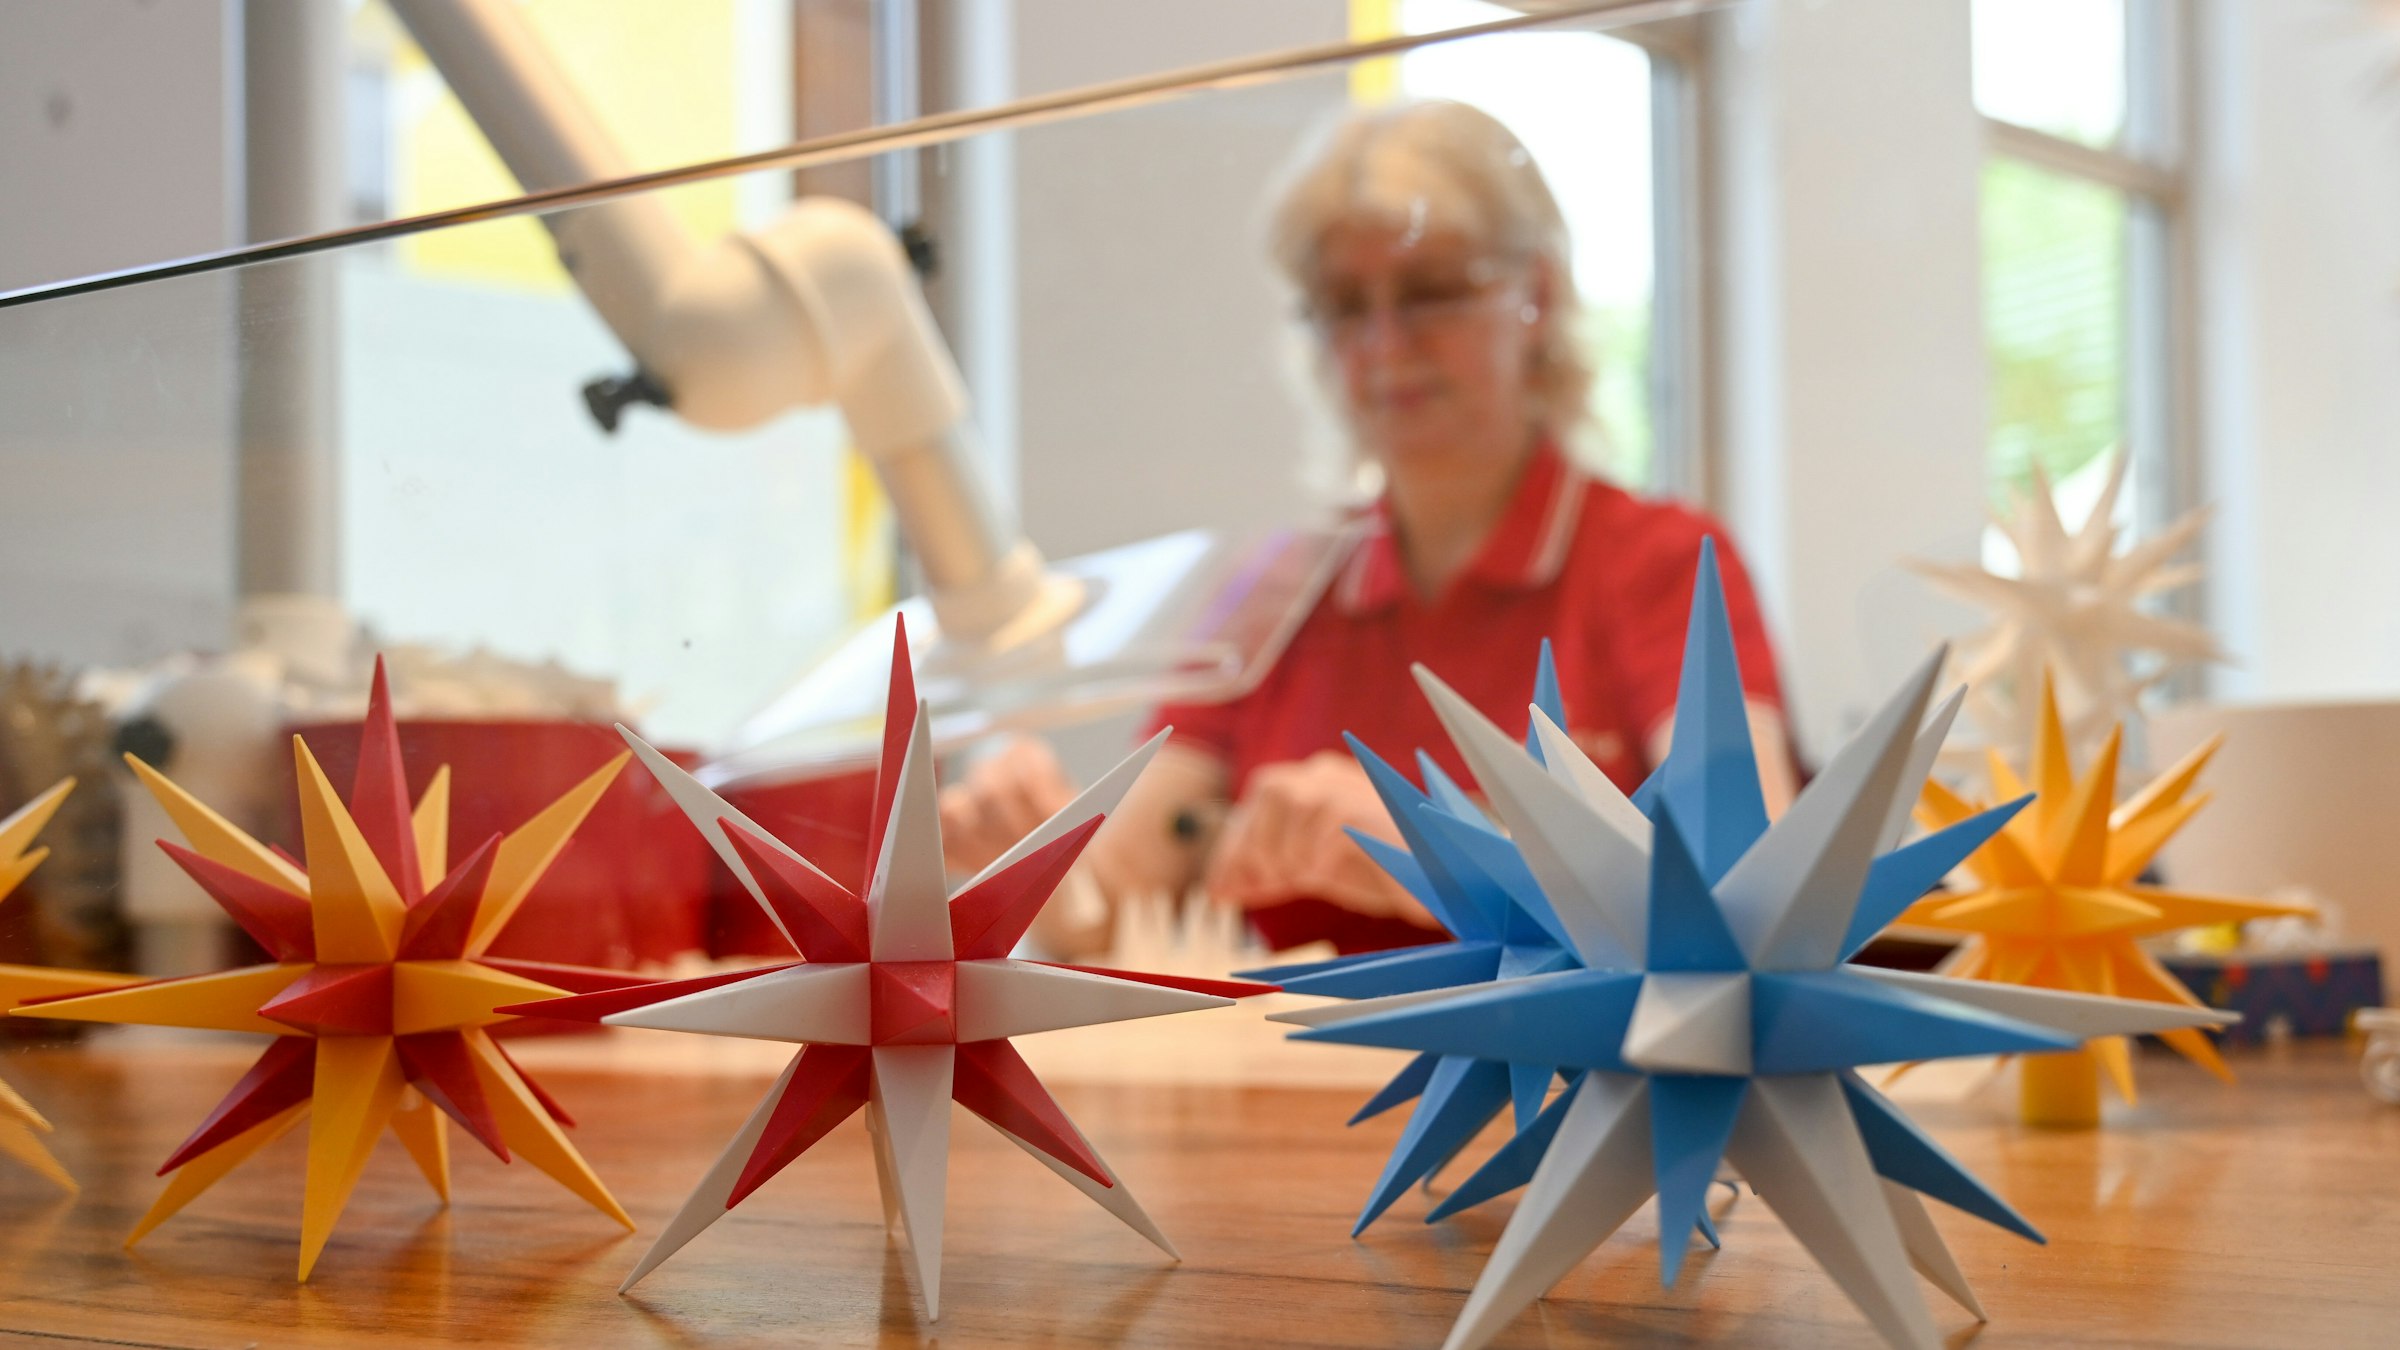 Moravian star factory: 125 years of Christmas — and geometry